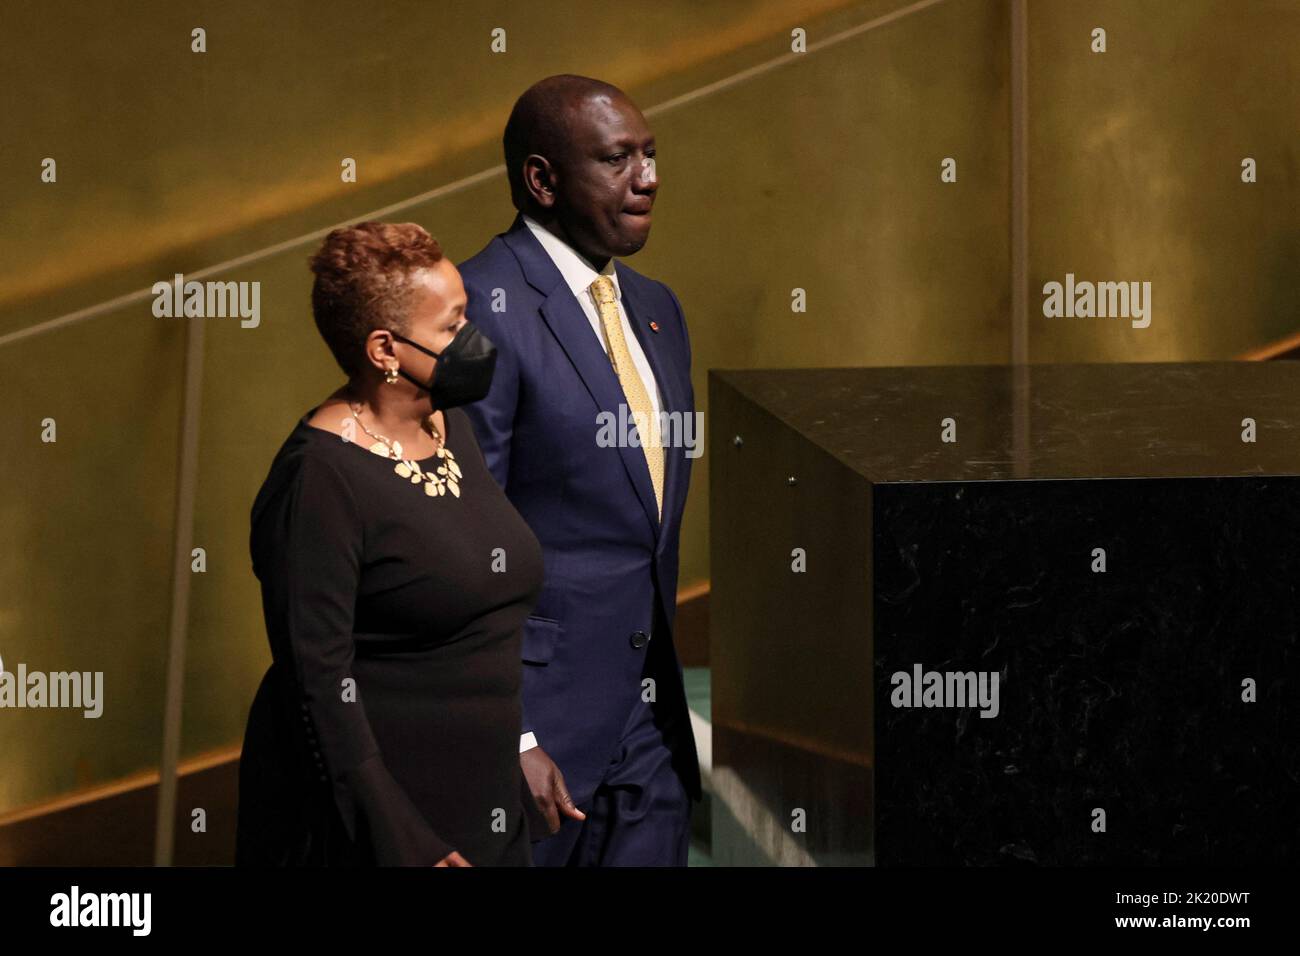 Kenya's President William Samoei Ruto arrives to address the 77th Session of the United Nations General Assembly at U.N. Headquarters in New York City, U.S., September 21, 2022. REUTERS/Brendan McDermid Stock Photo